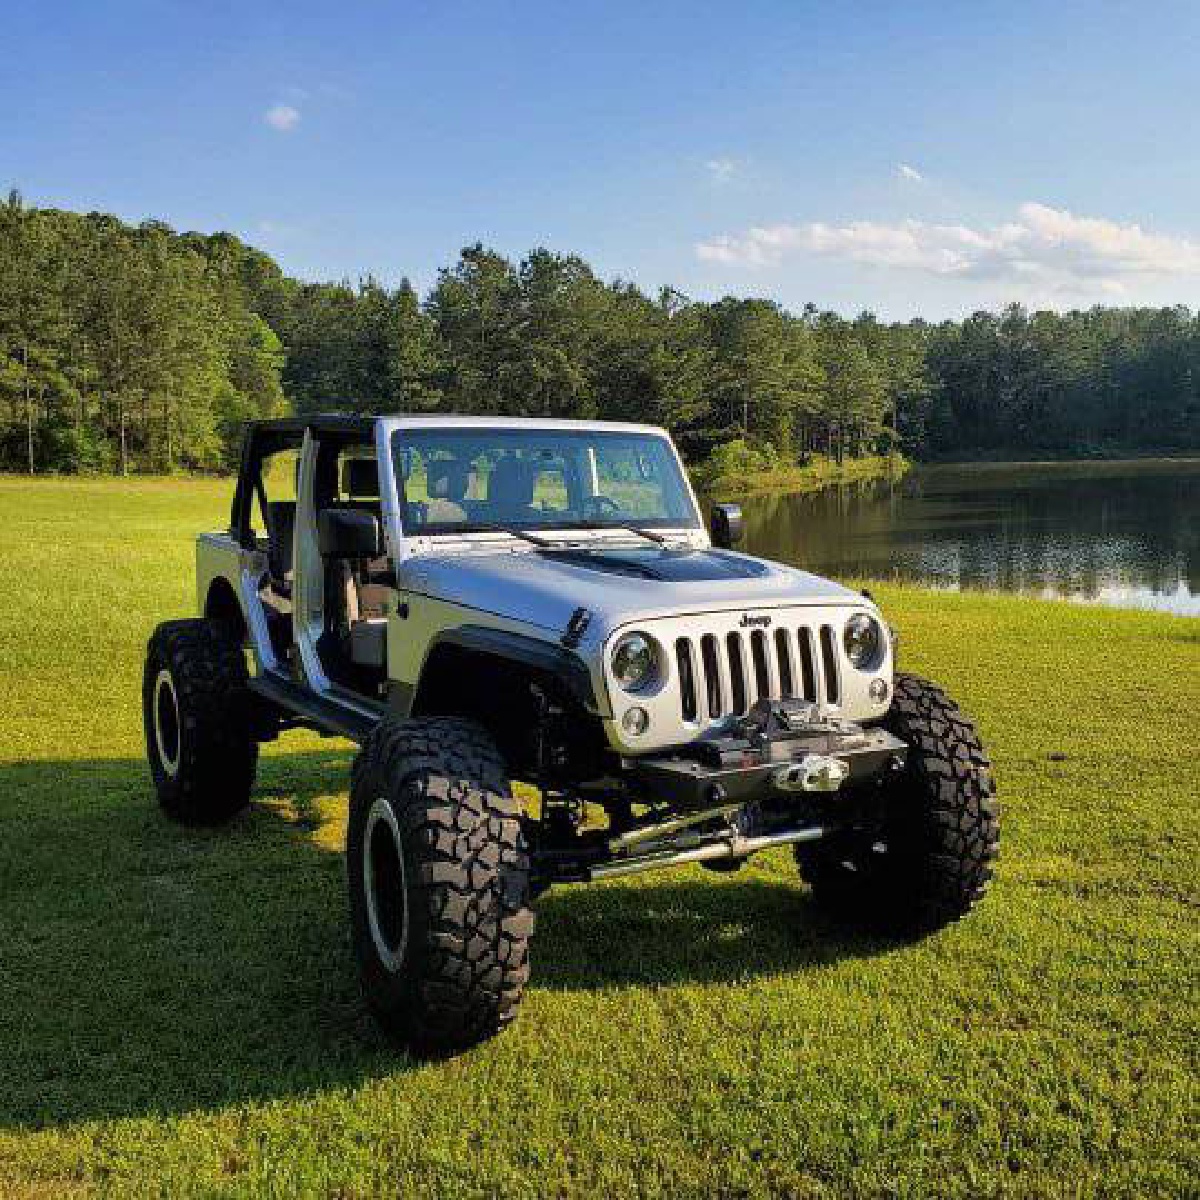 2009 Jeep Wrangler JK Unlimited with LS3 on Tons and 42s - BuiltRigs